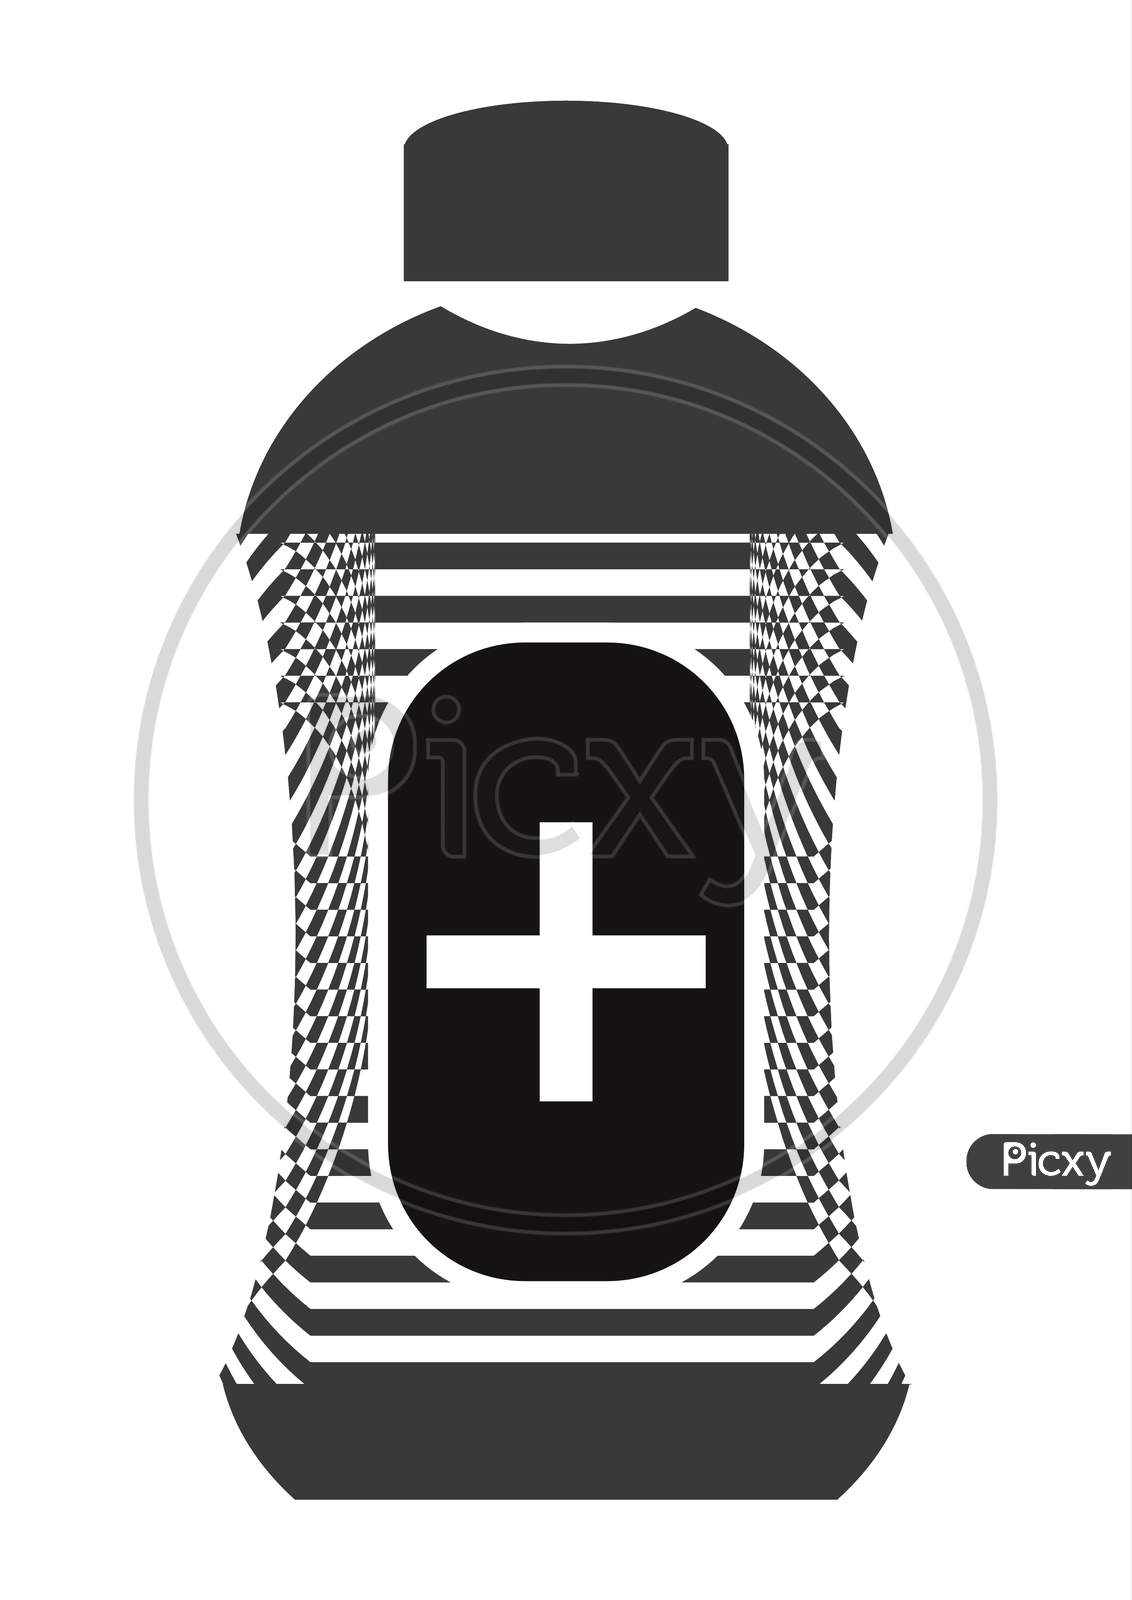 Picture Of A Health Care, Medical Bottle Graphic Design In Black And White Color.